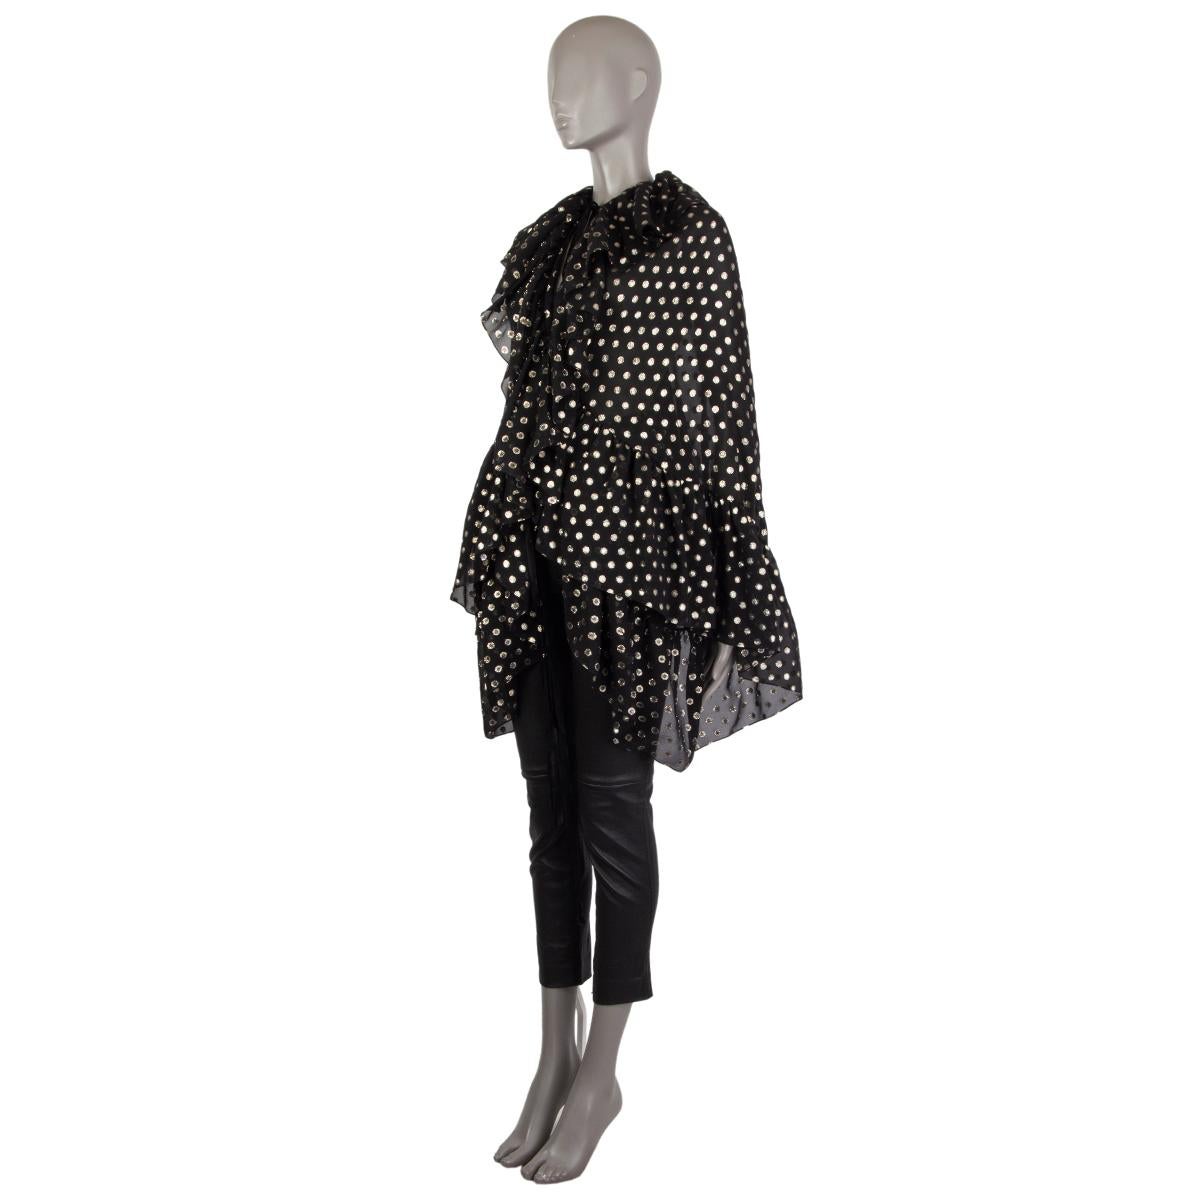 Saint Laurent polka-dot chiffon cape in black and gold silk (83%) and metal (7%). With ruffled trims and gathered strech waistband. Ties at the neck and waist with straps. Has been worn and is in excellent condition. 

Tag Size 36
Size XS
Bust 120cm